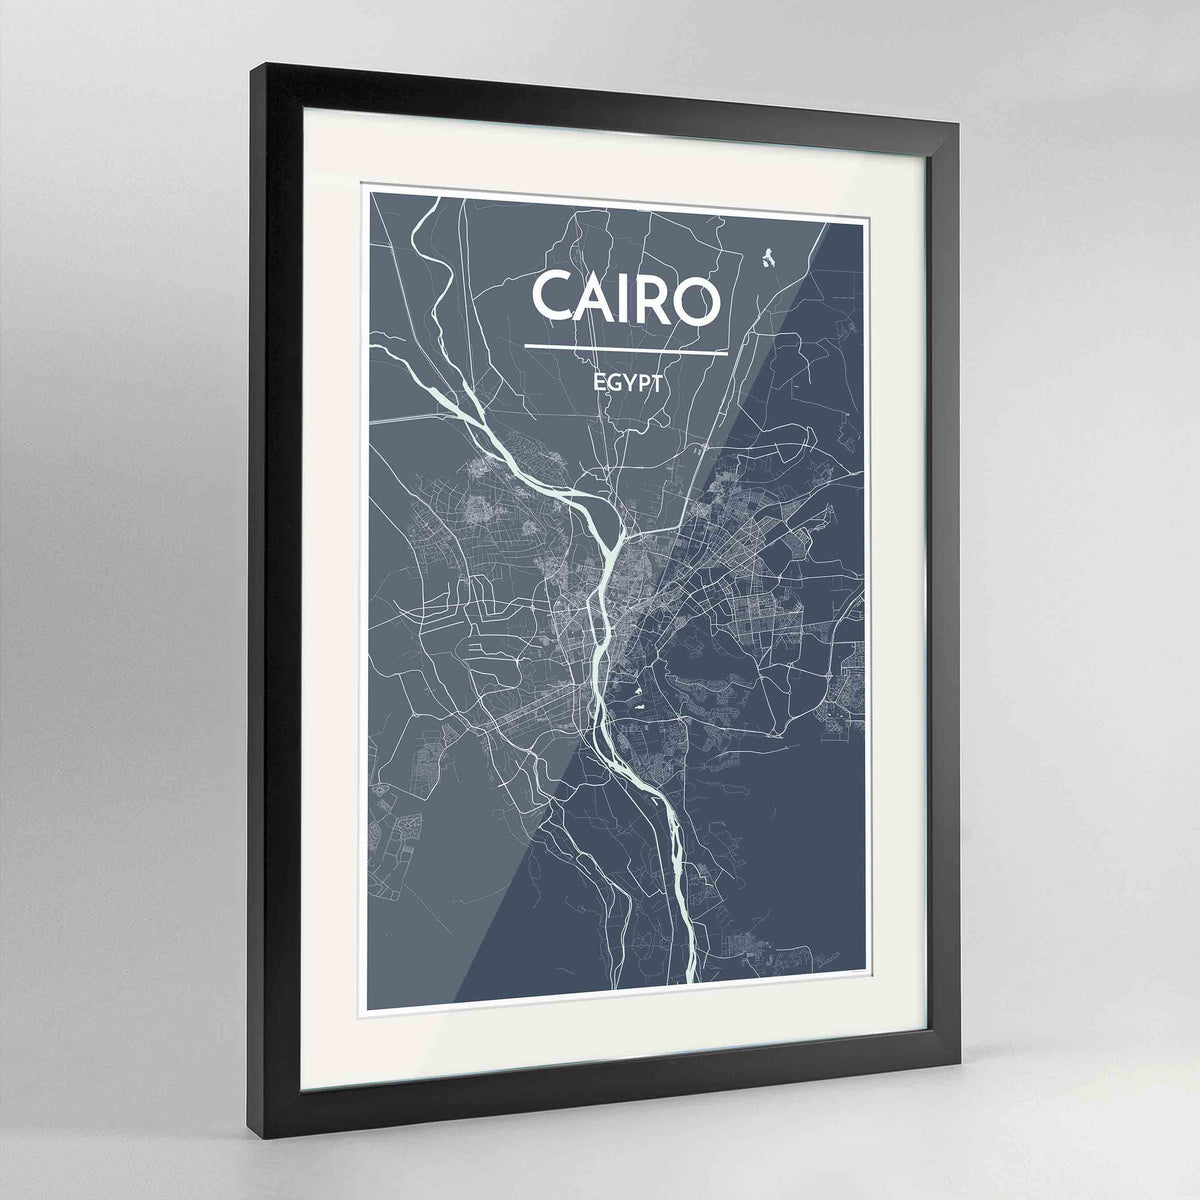 Framed Cairo Map Art Print 24x36&quot; Contemporary Black frame Point Two Design Group